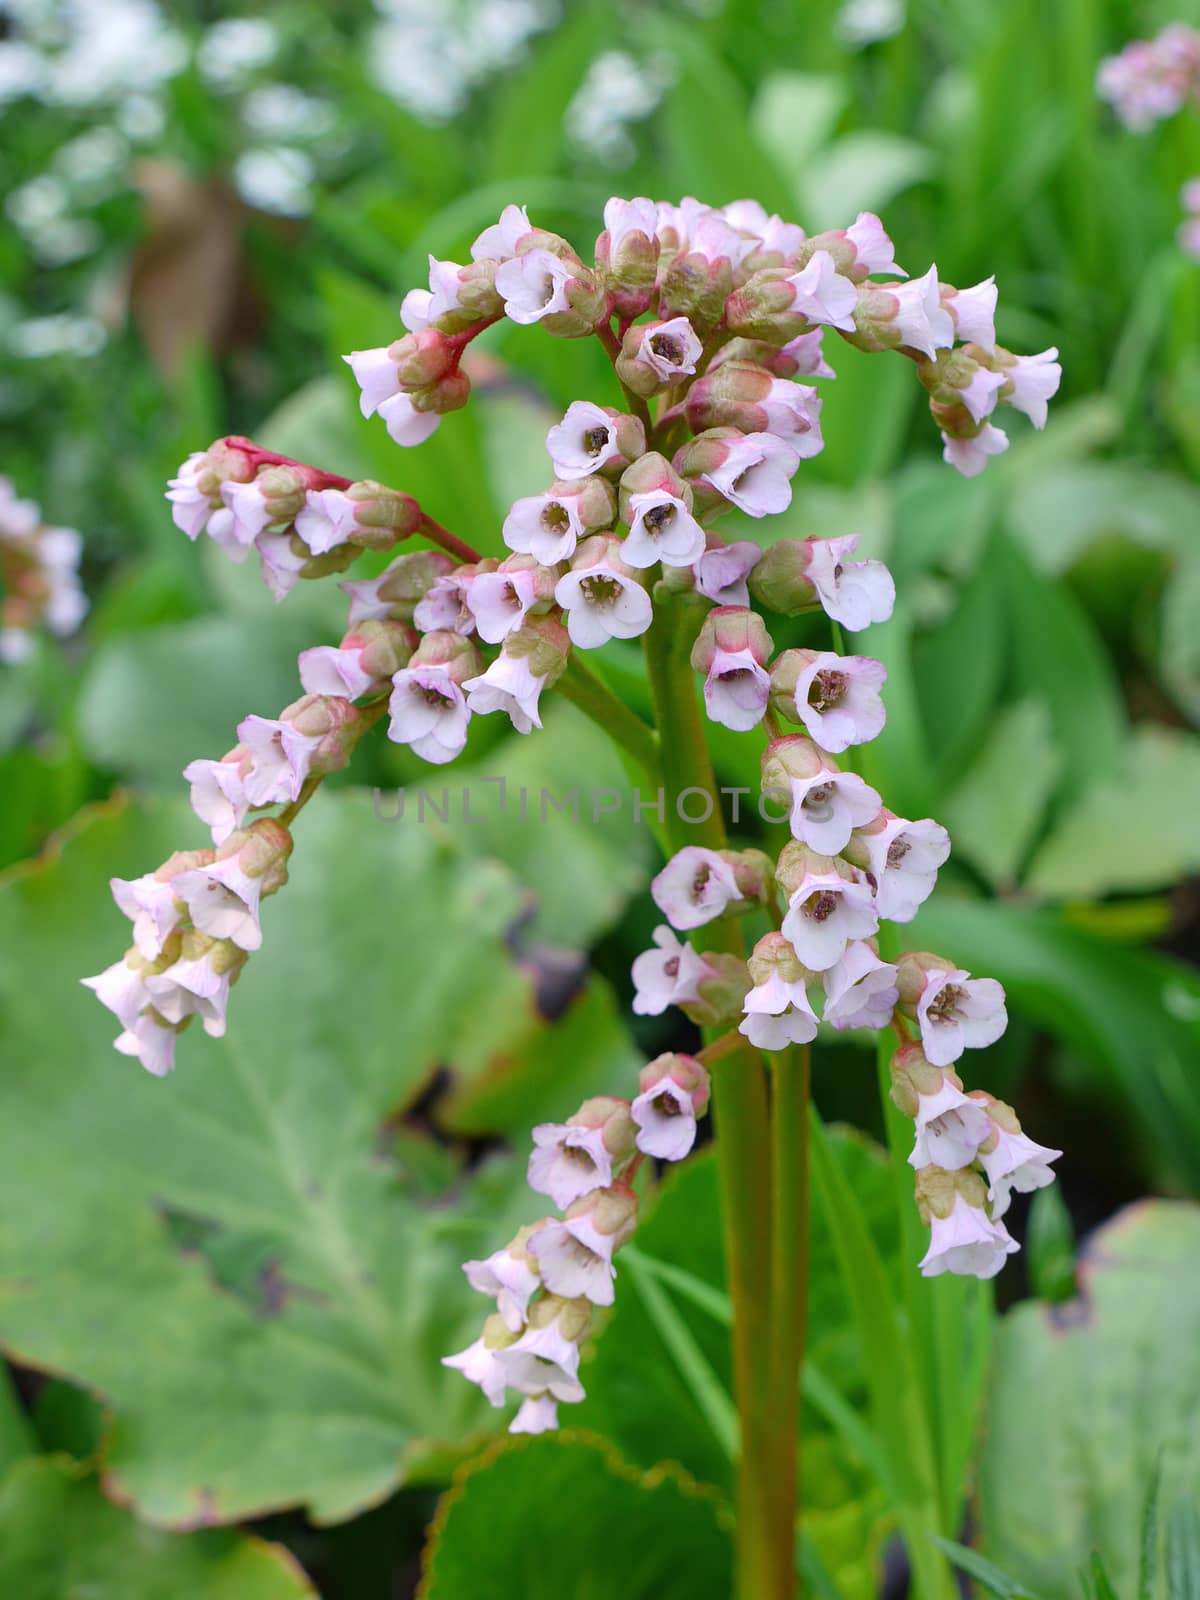 A few thick, green stalks with lots of small flower bells of white color by Adamchuk